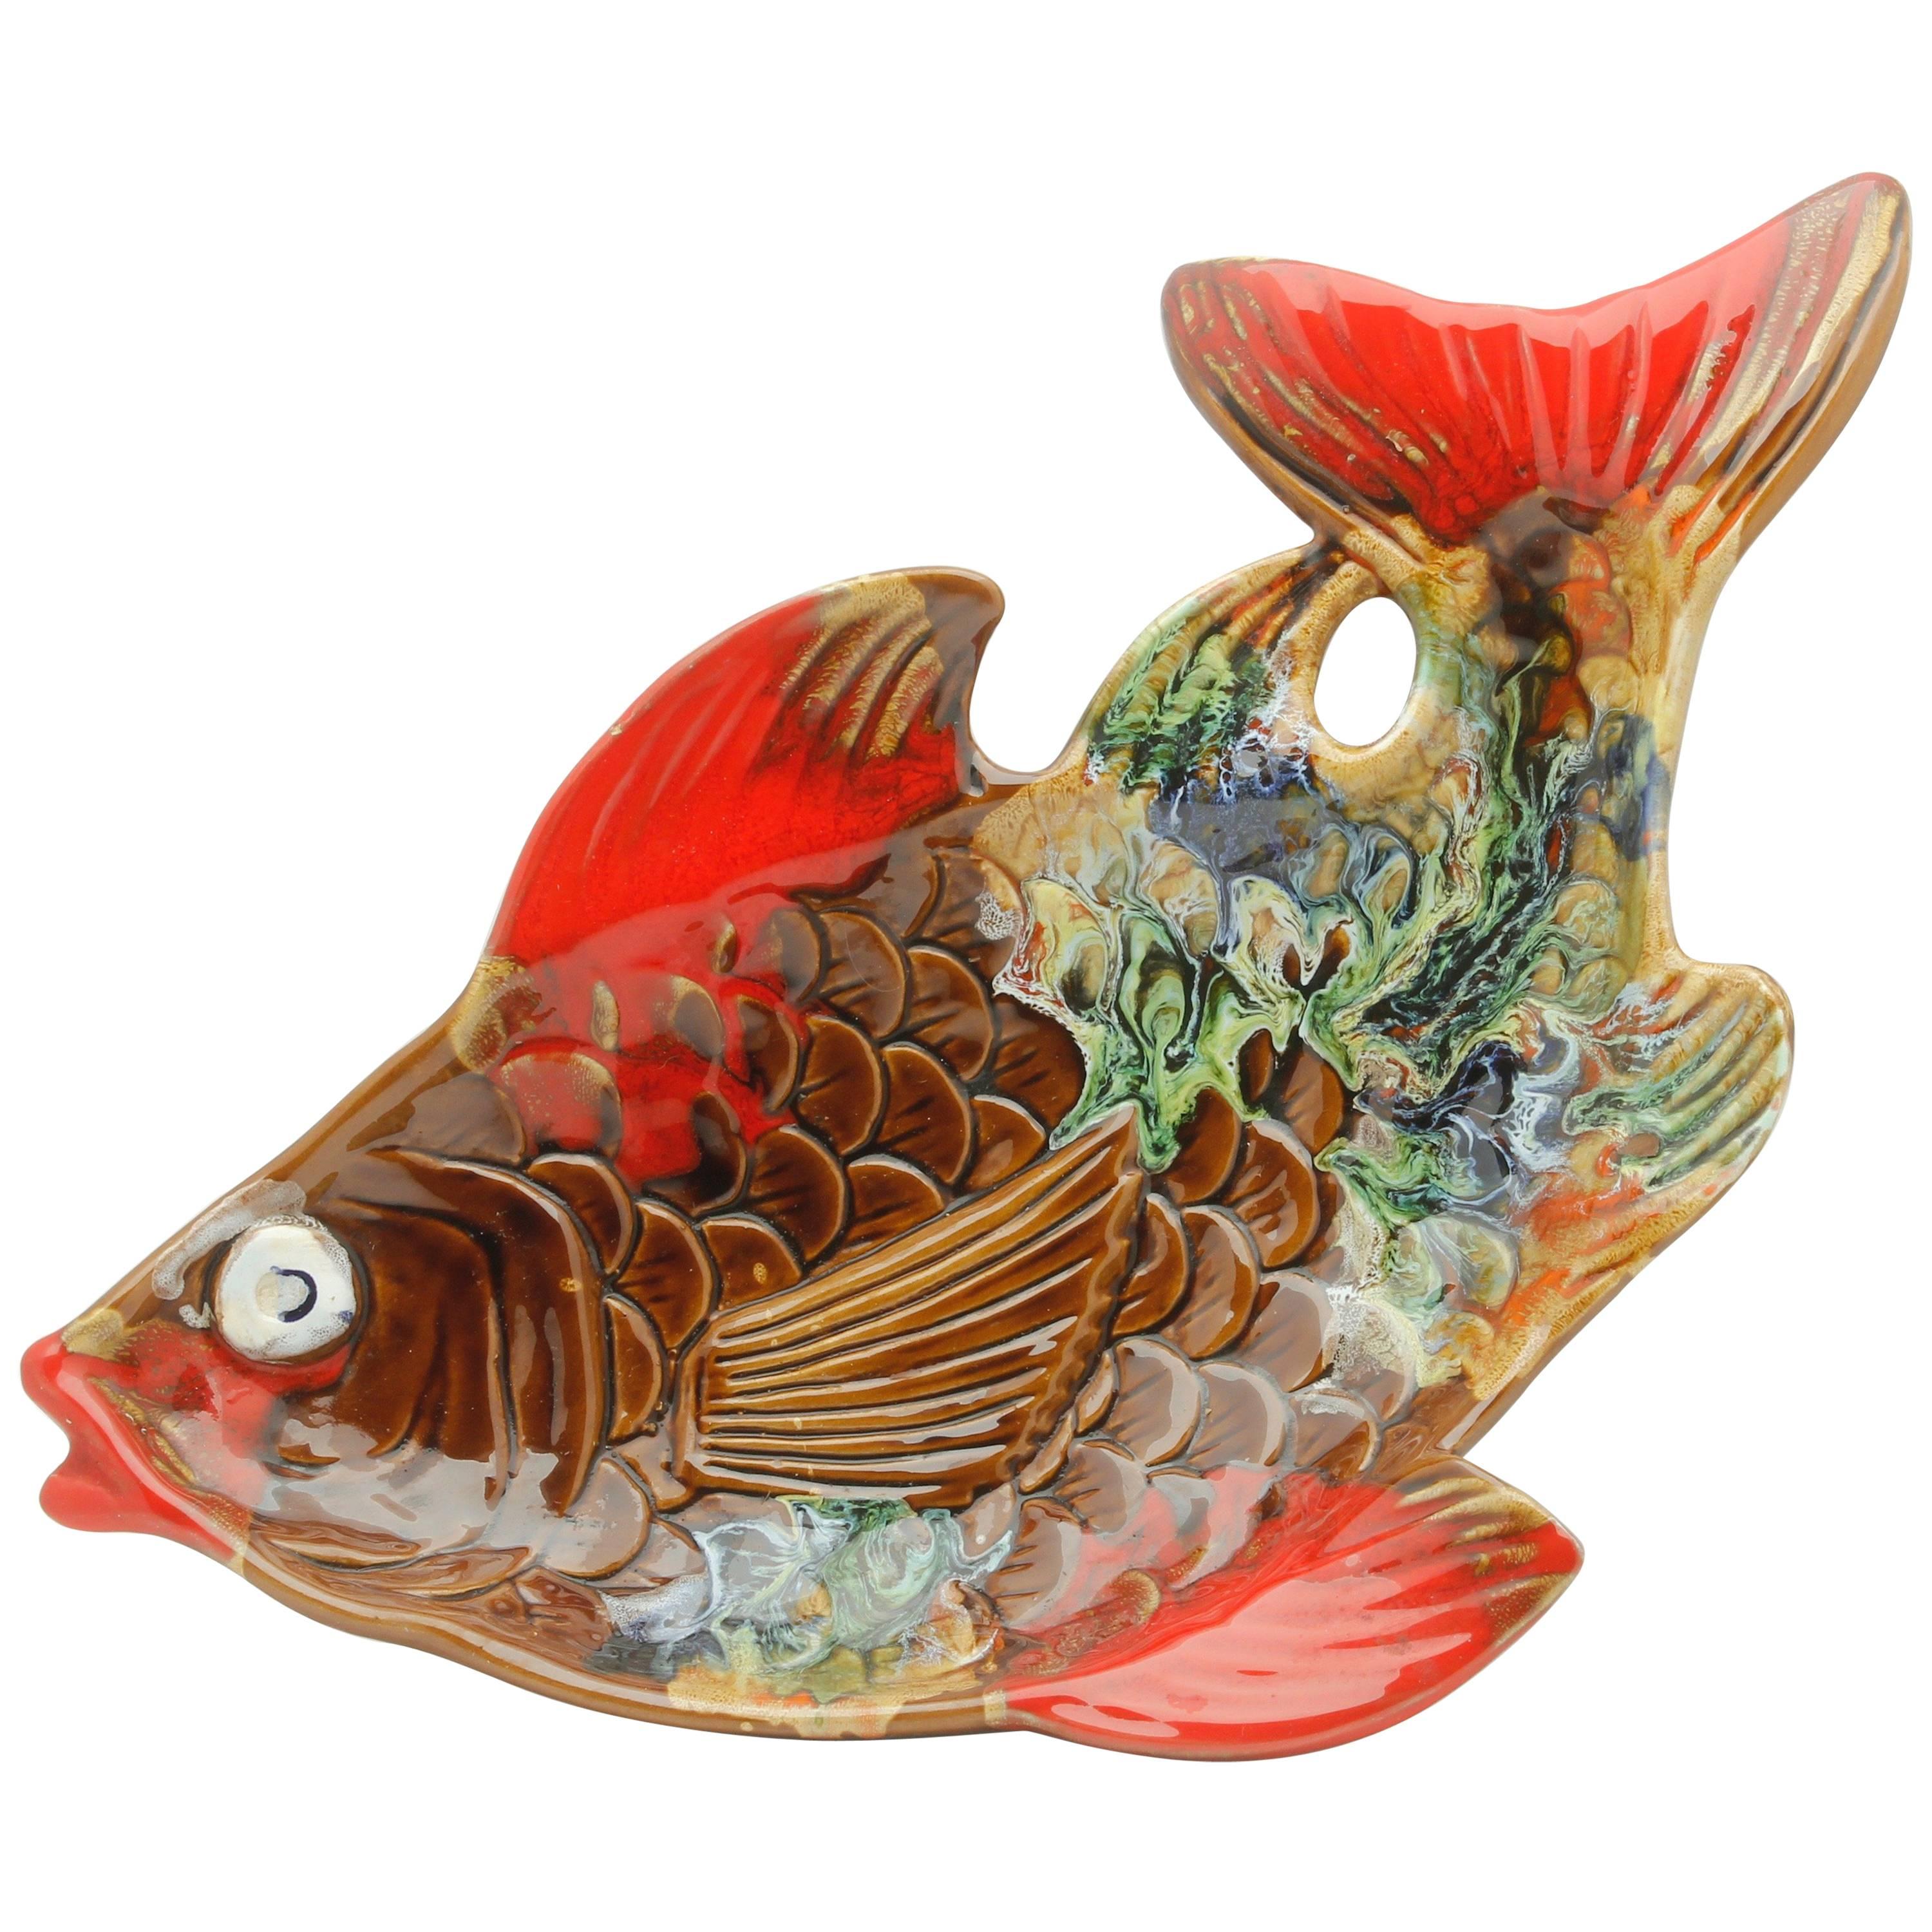 Vallauris 'France' Pottery Ceramic Fish Shape in Colors Red and Brown and Green